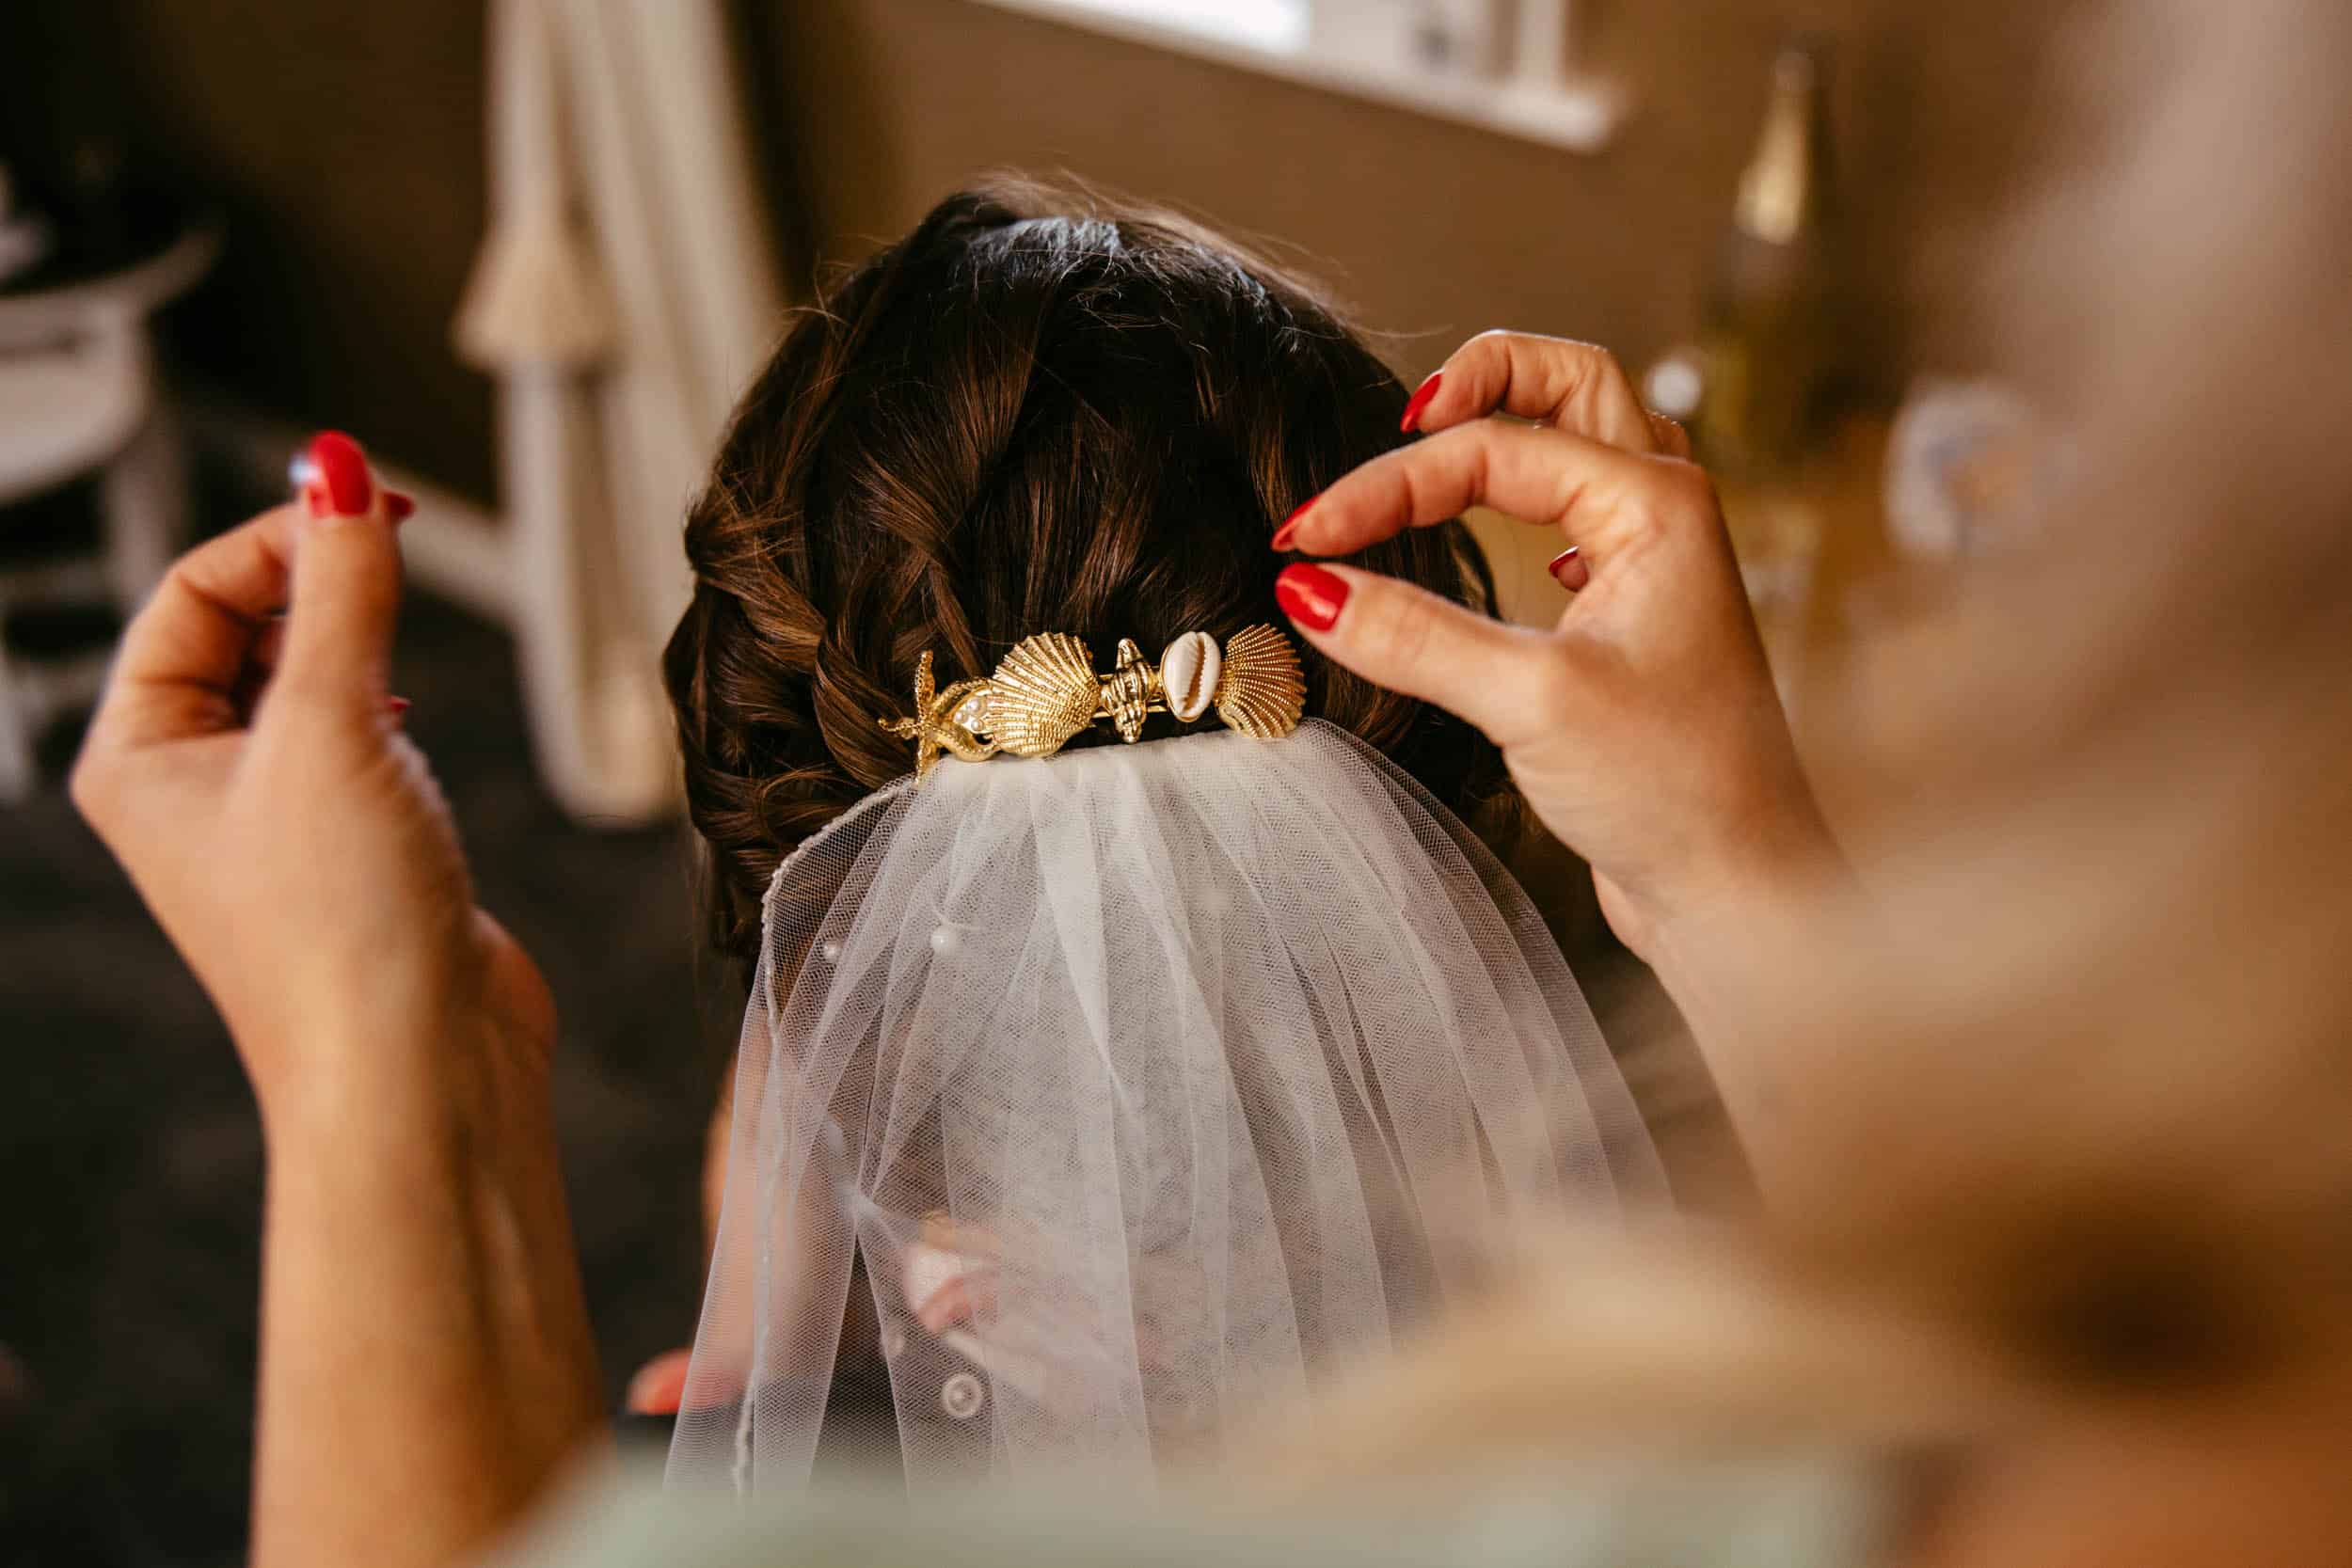 A bride adorned with a veil, preparing for her wedding in front of a mirror.